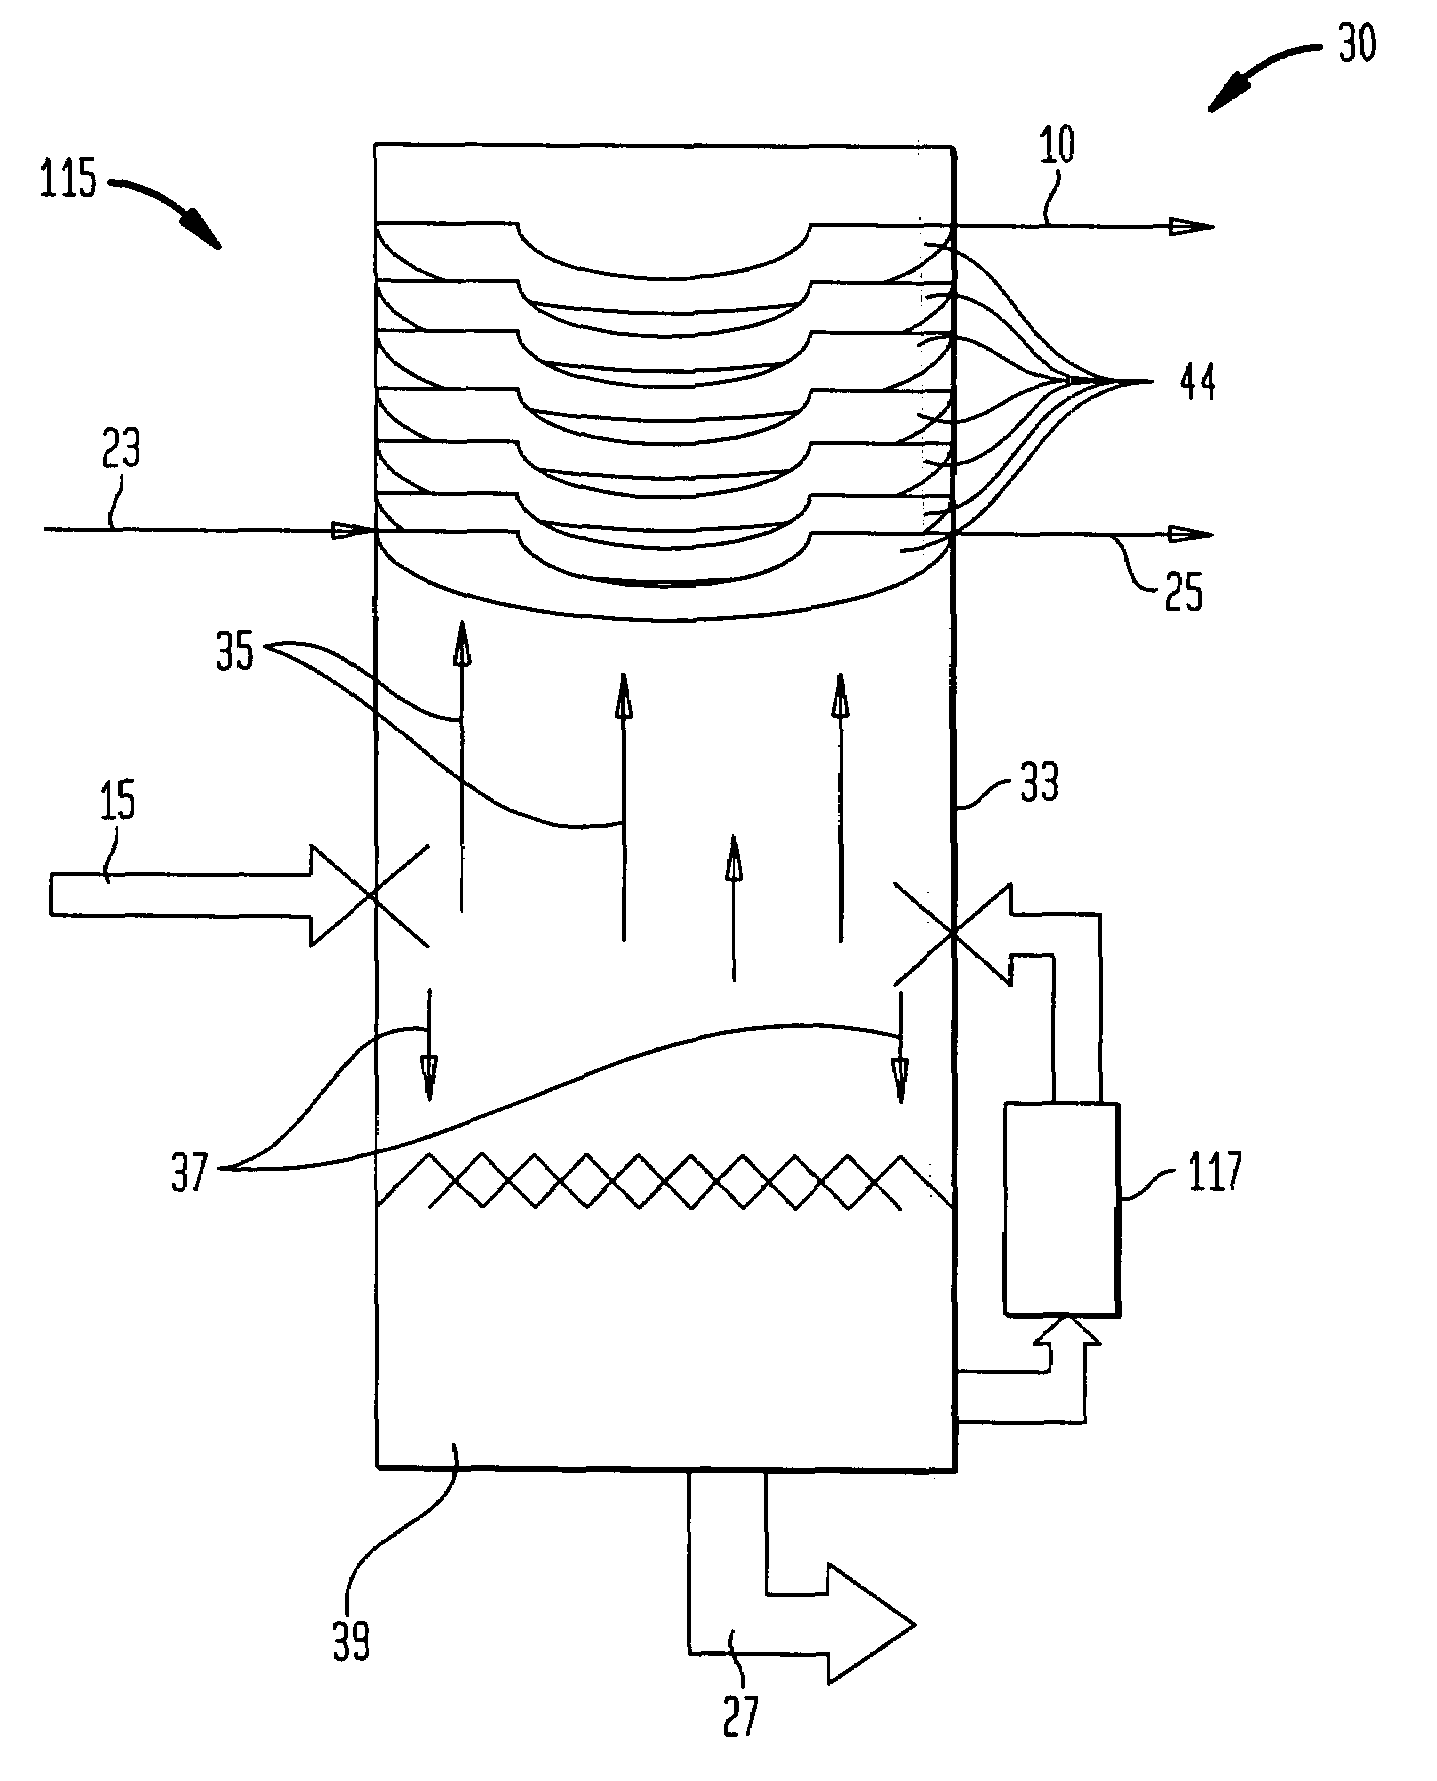 Method for recovering unreacted alcohol from biodiesel product streams by flash purification